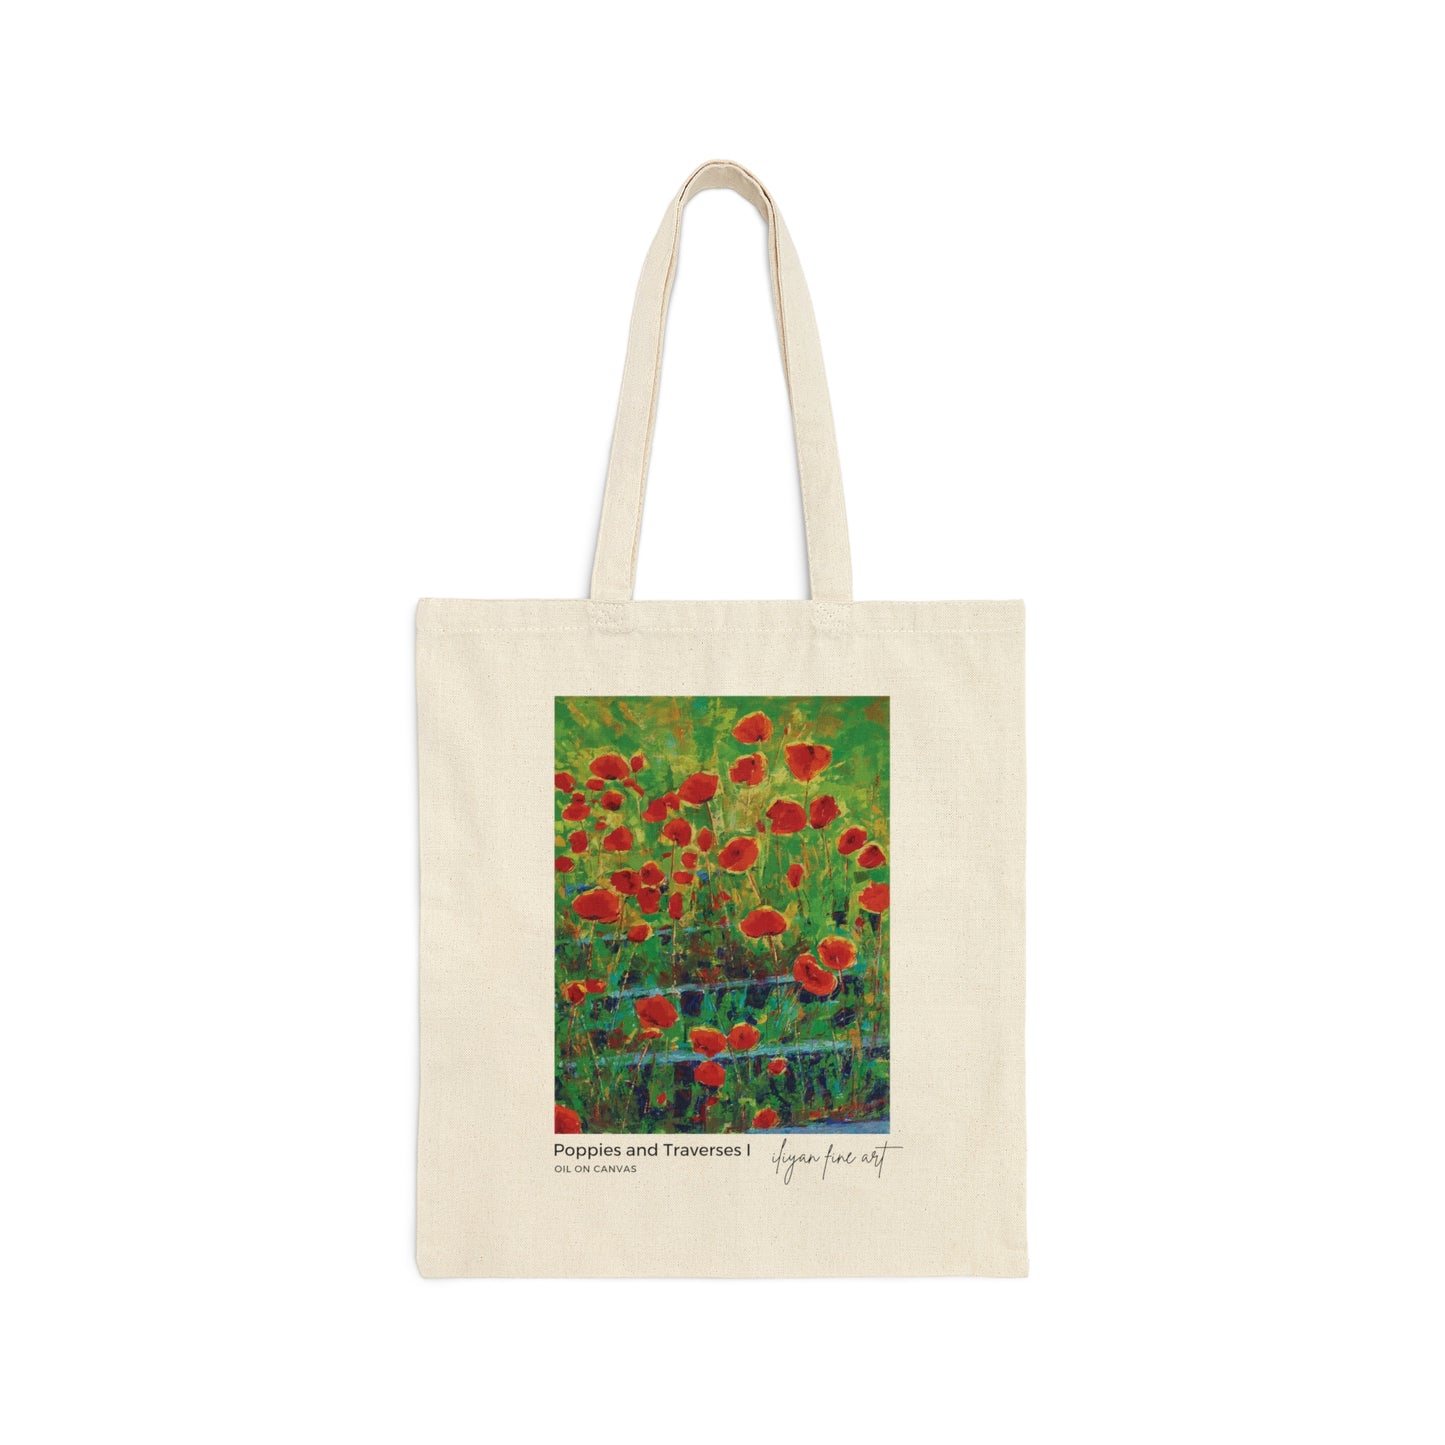 Canvas Tote Bag - Poppies and Traverses I